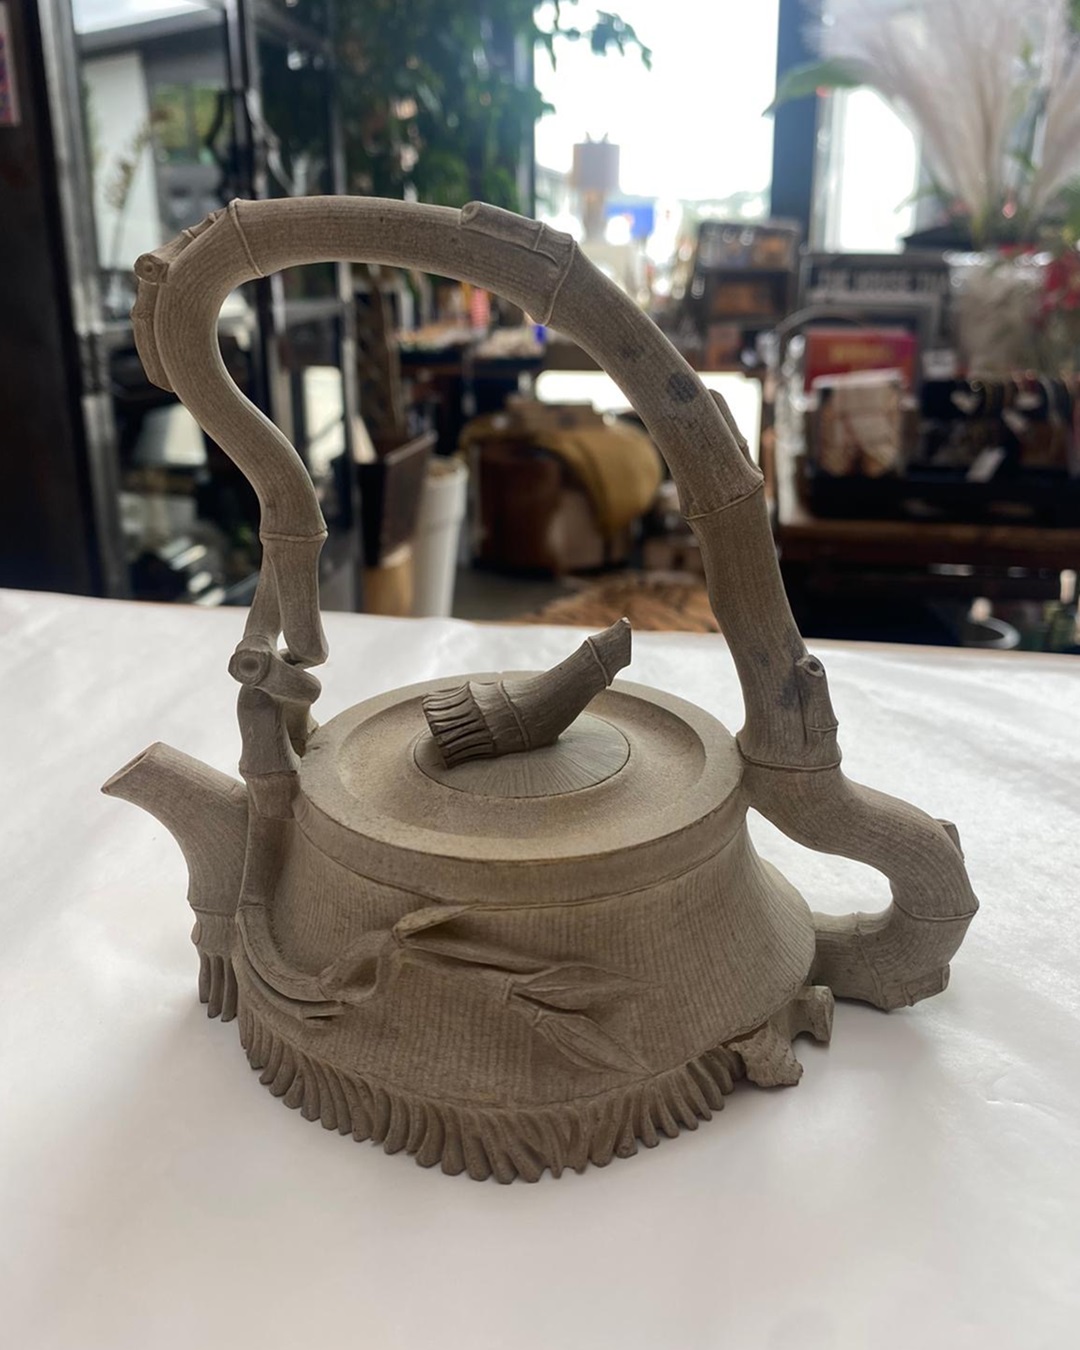 Japanese clay teapot on bench